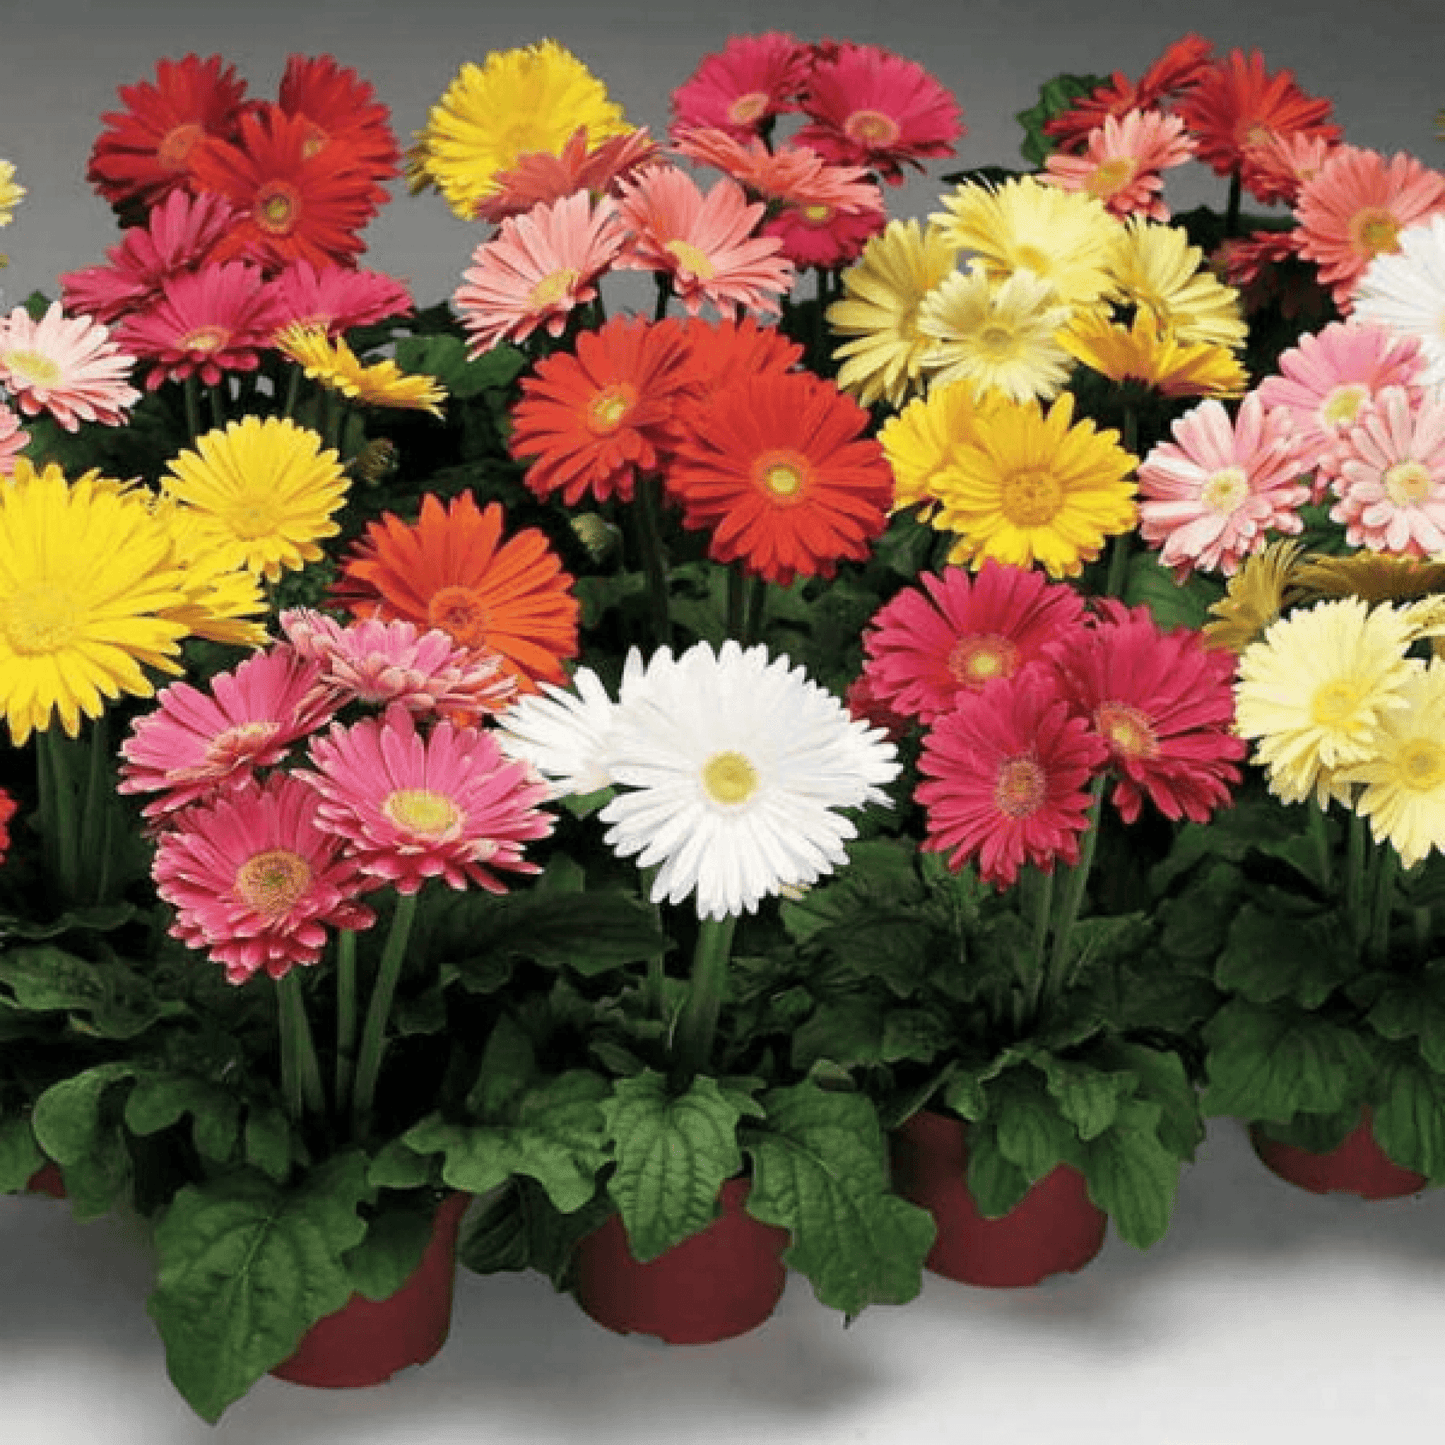 Gerbera Micro Mini Mixed Color, African Daisy, Transvaal Daisy, Barberton Daisy, Aster - Flower Seeds pack of 15